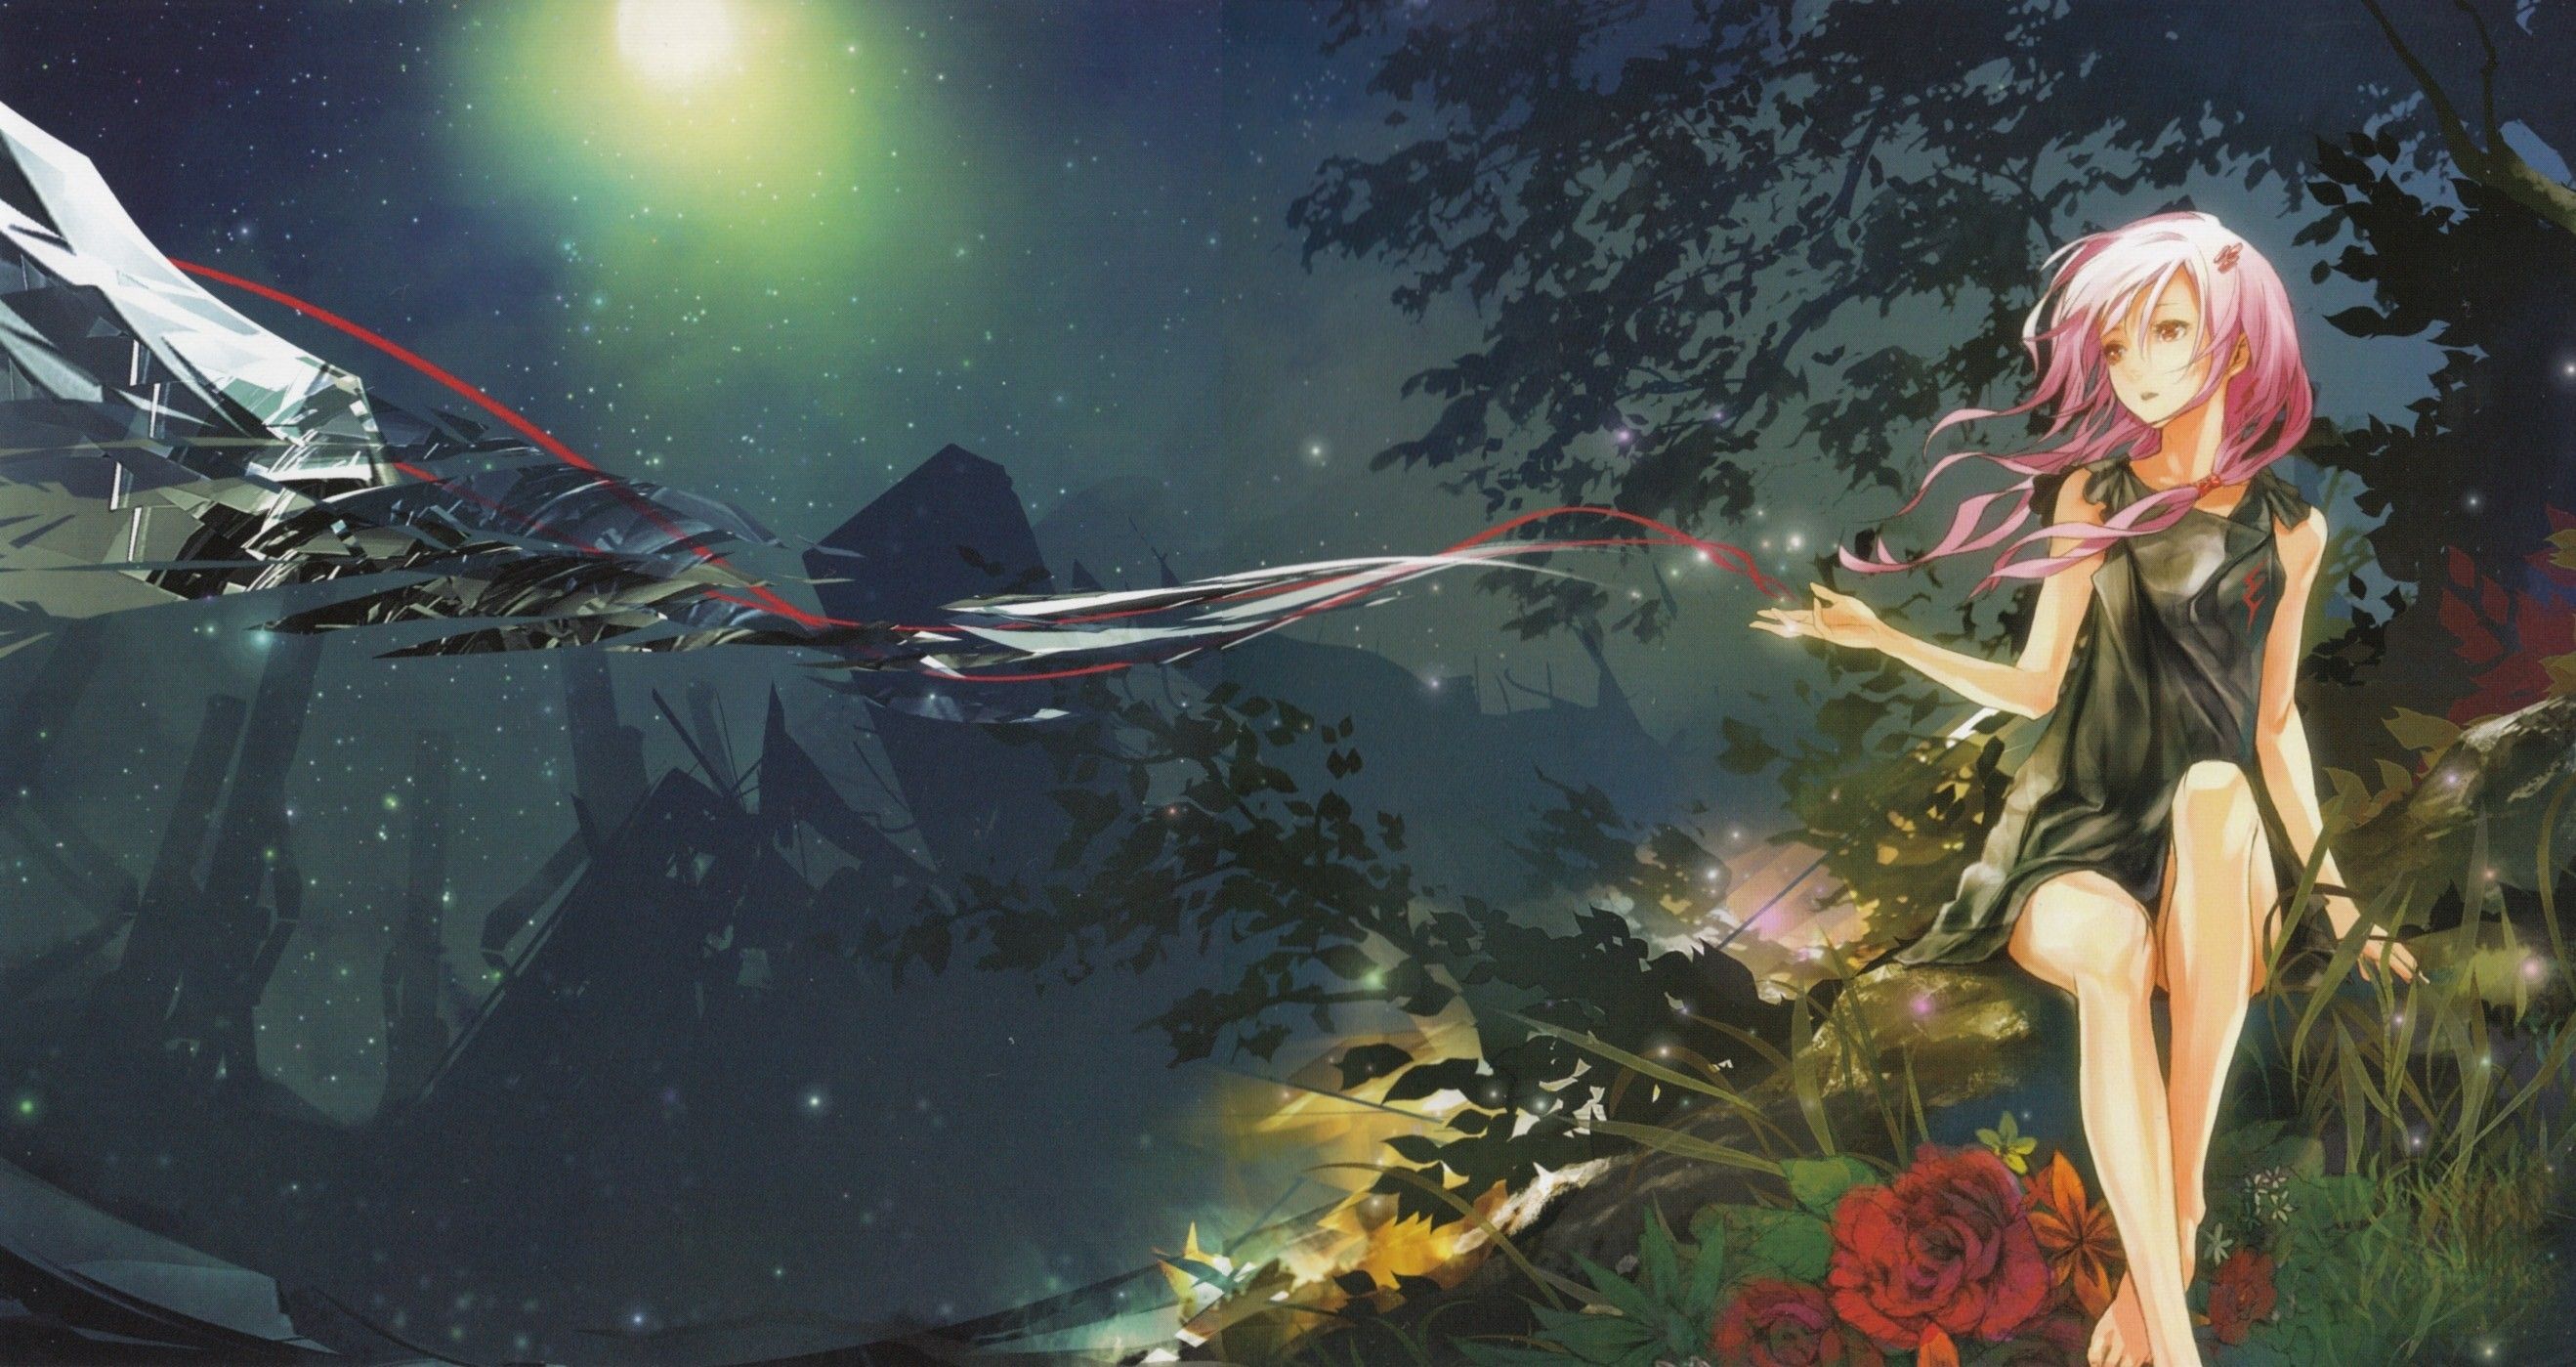 Guilty Crown, landscape, nature, rose, red eyes, night, anime